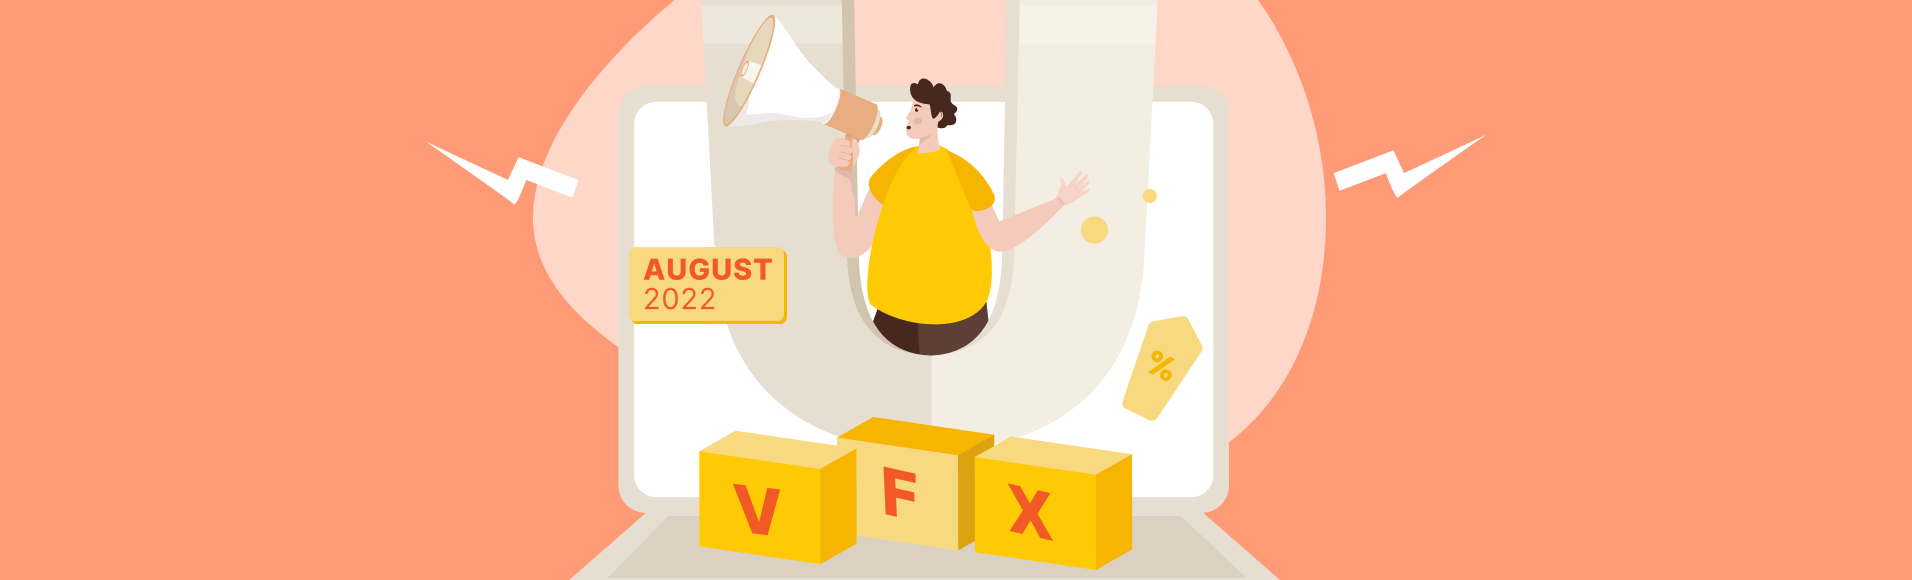 Promotional campaigns vfxAlert in August 2022